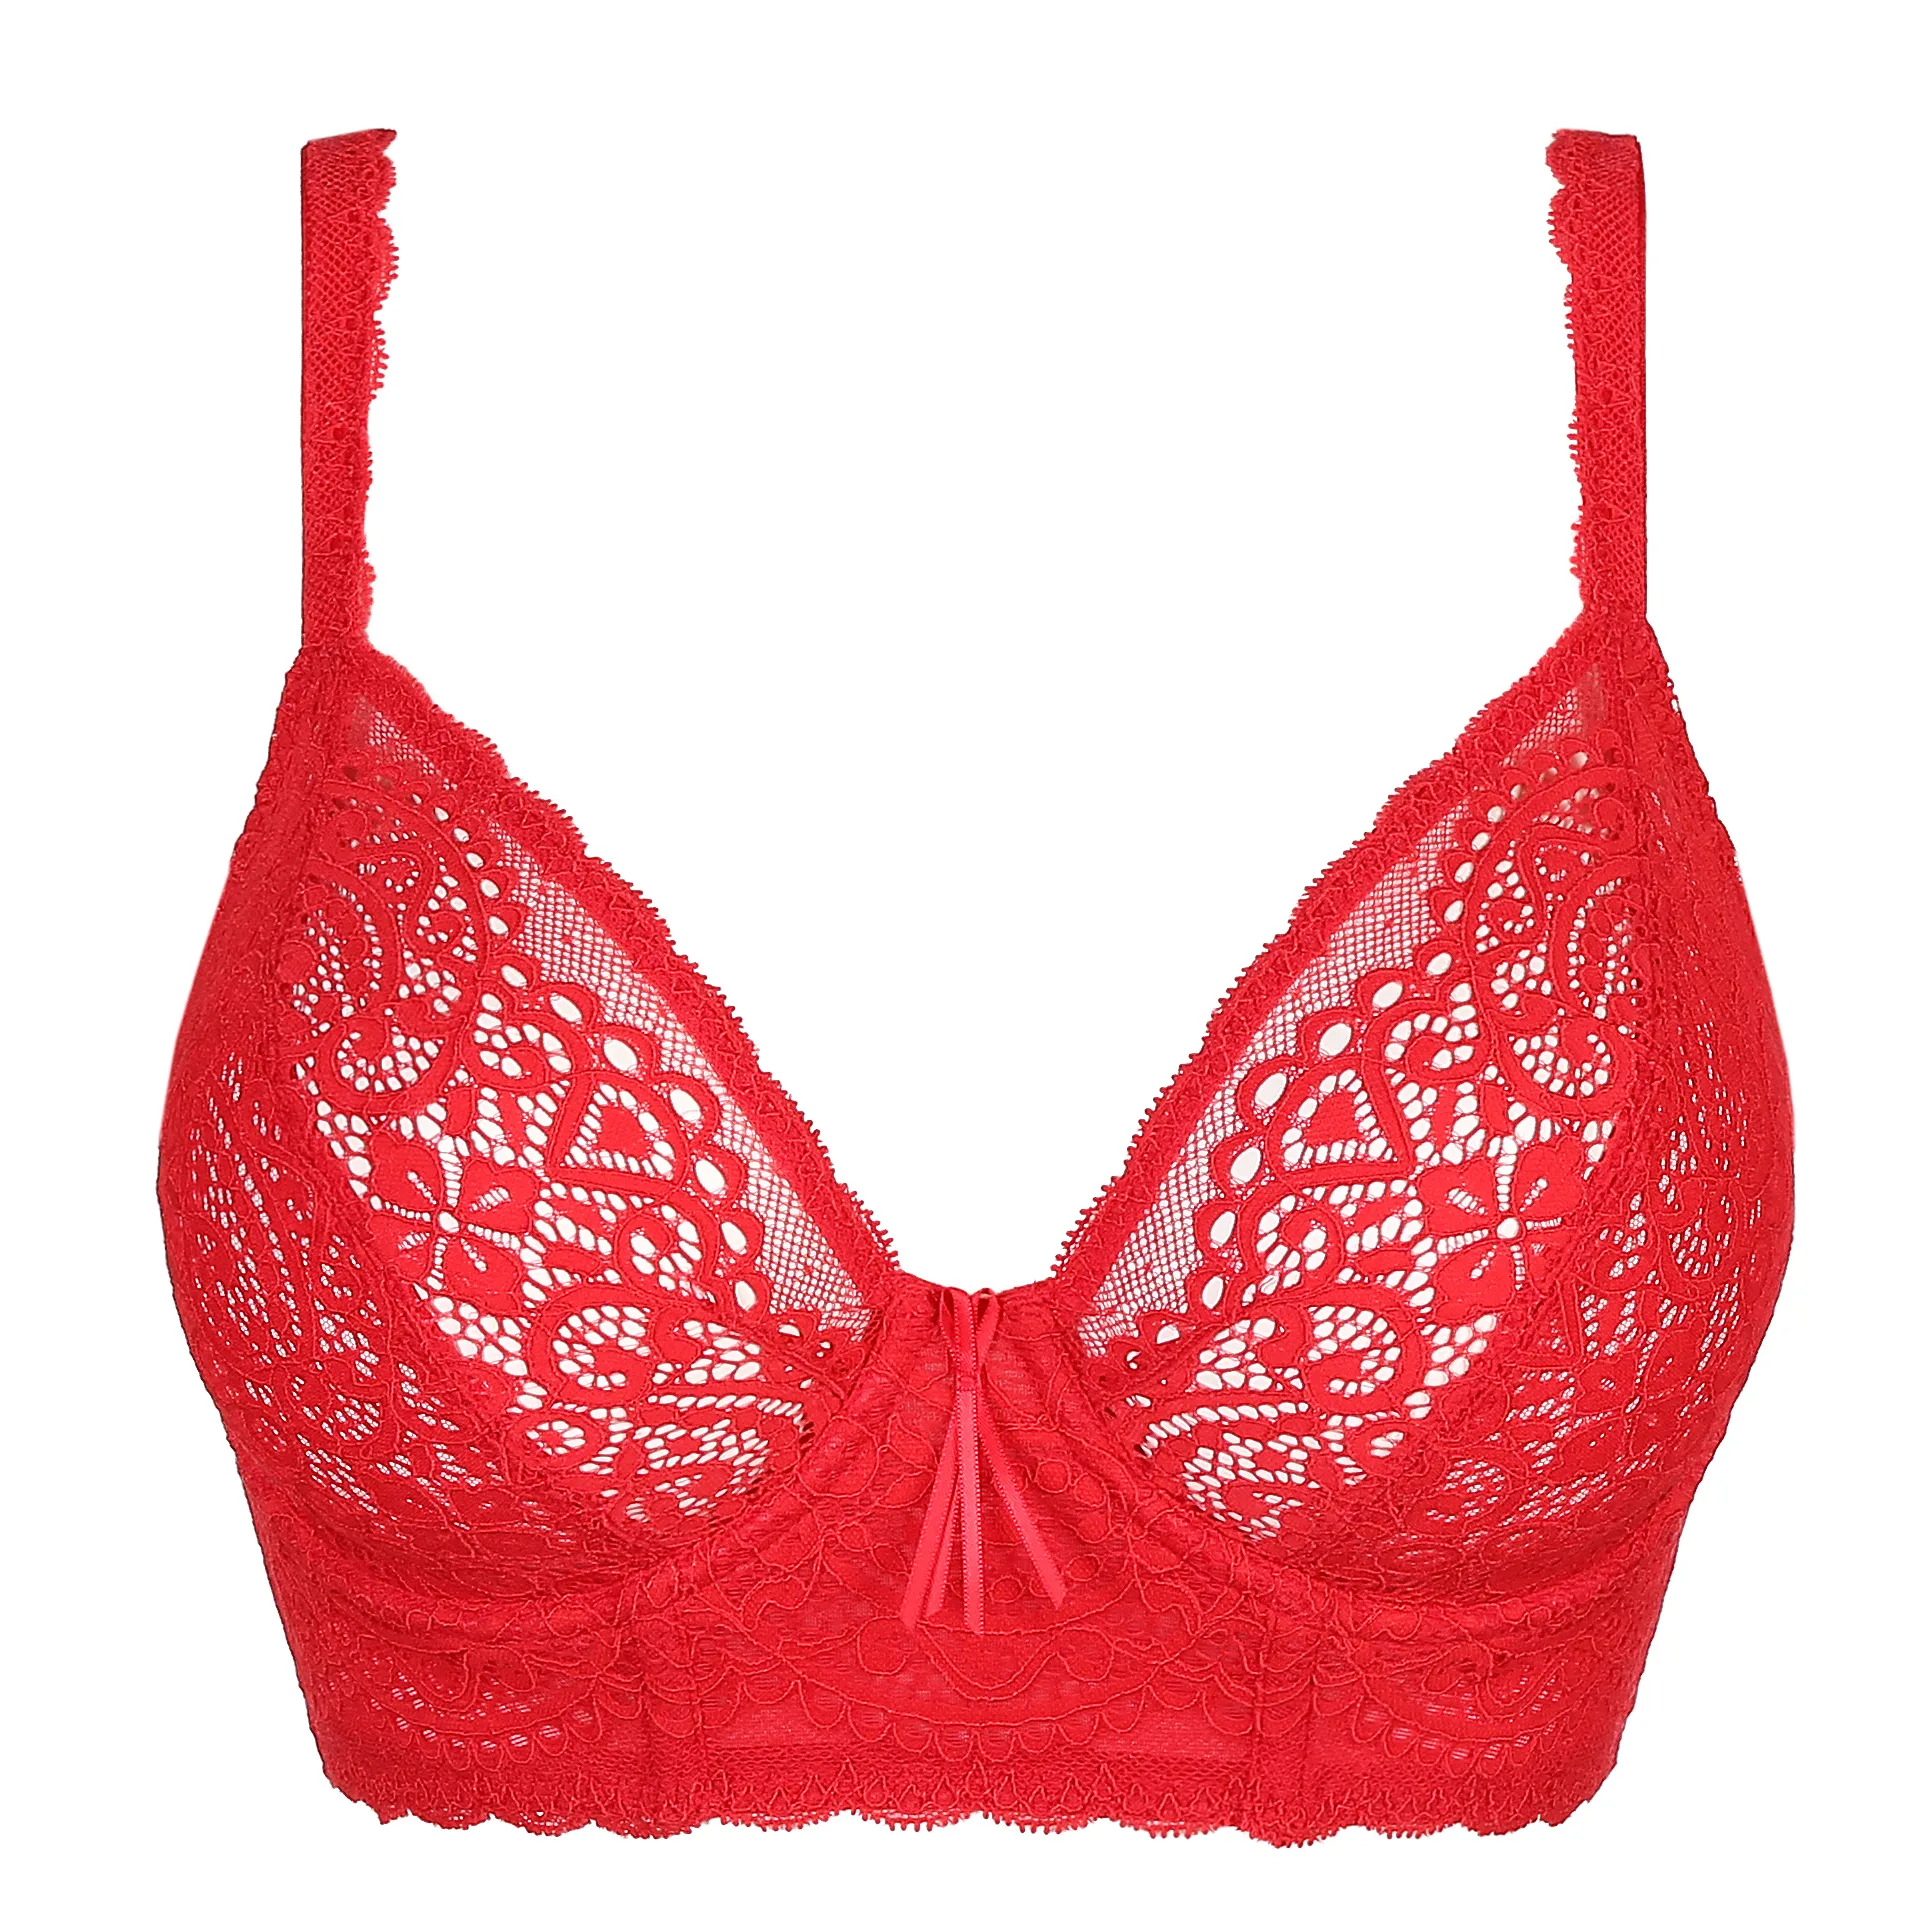 LUNNA Bra size it 6c us 40c eu 90c padded underwired red lace